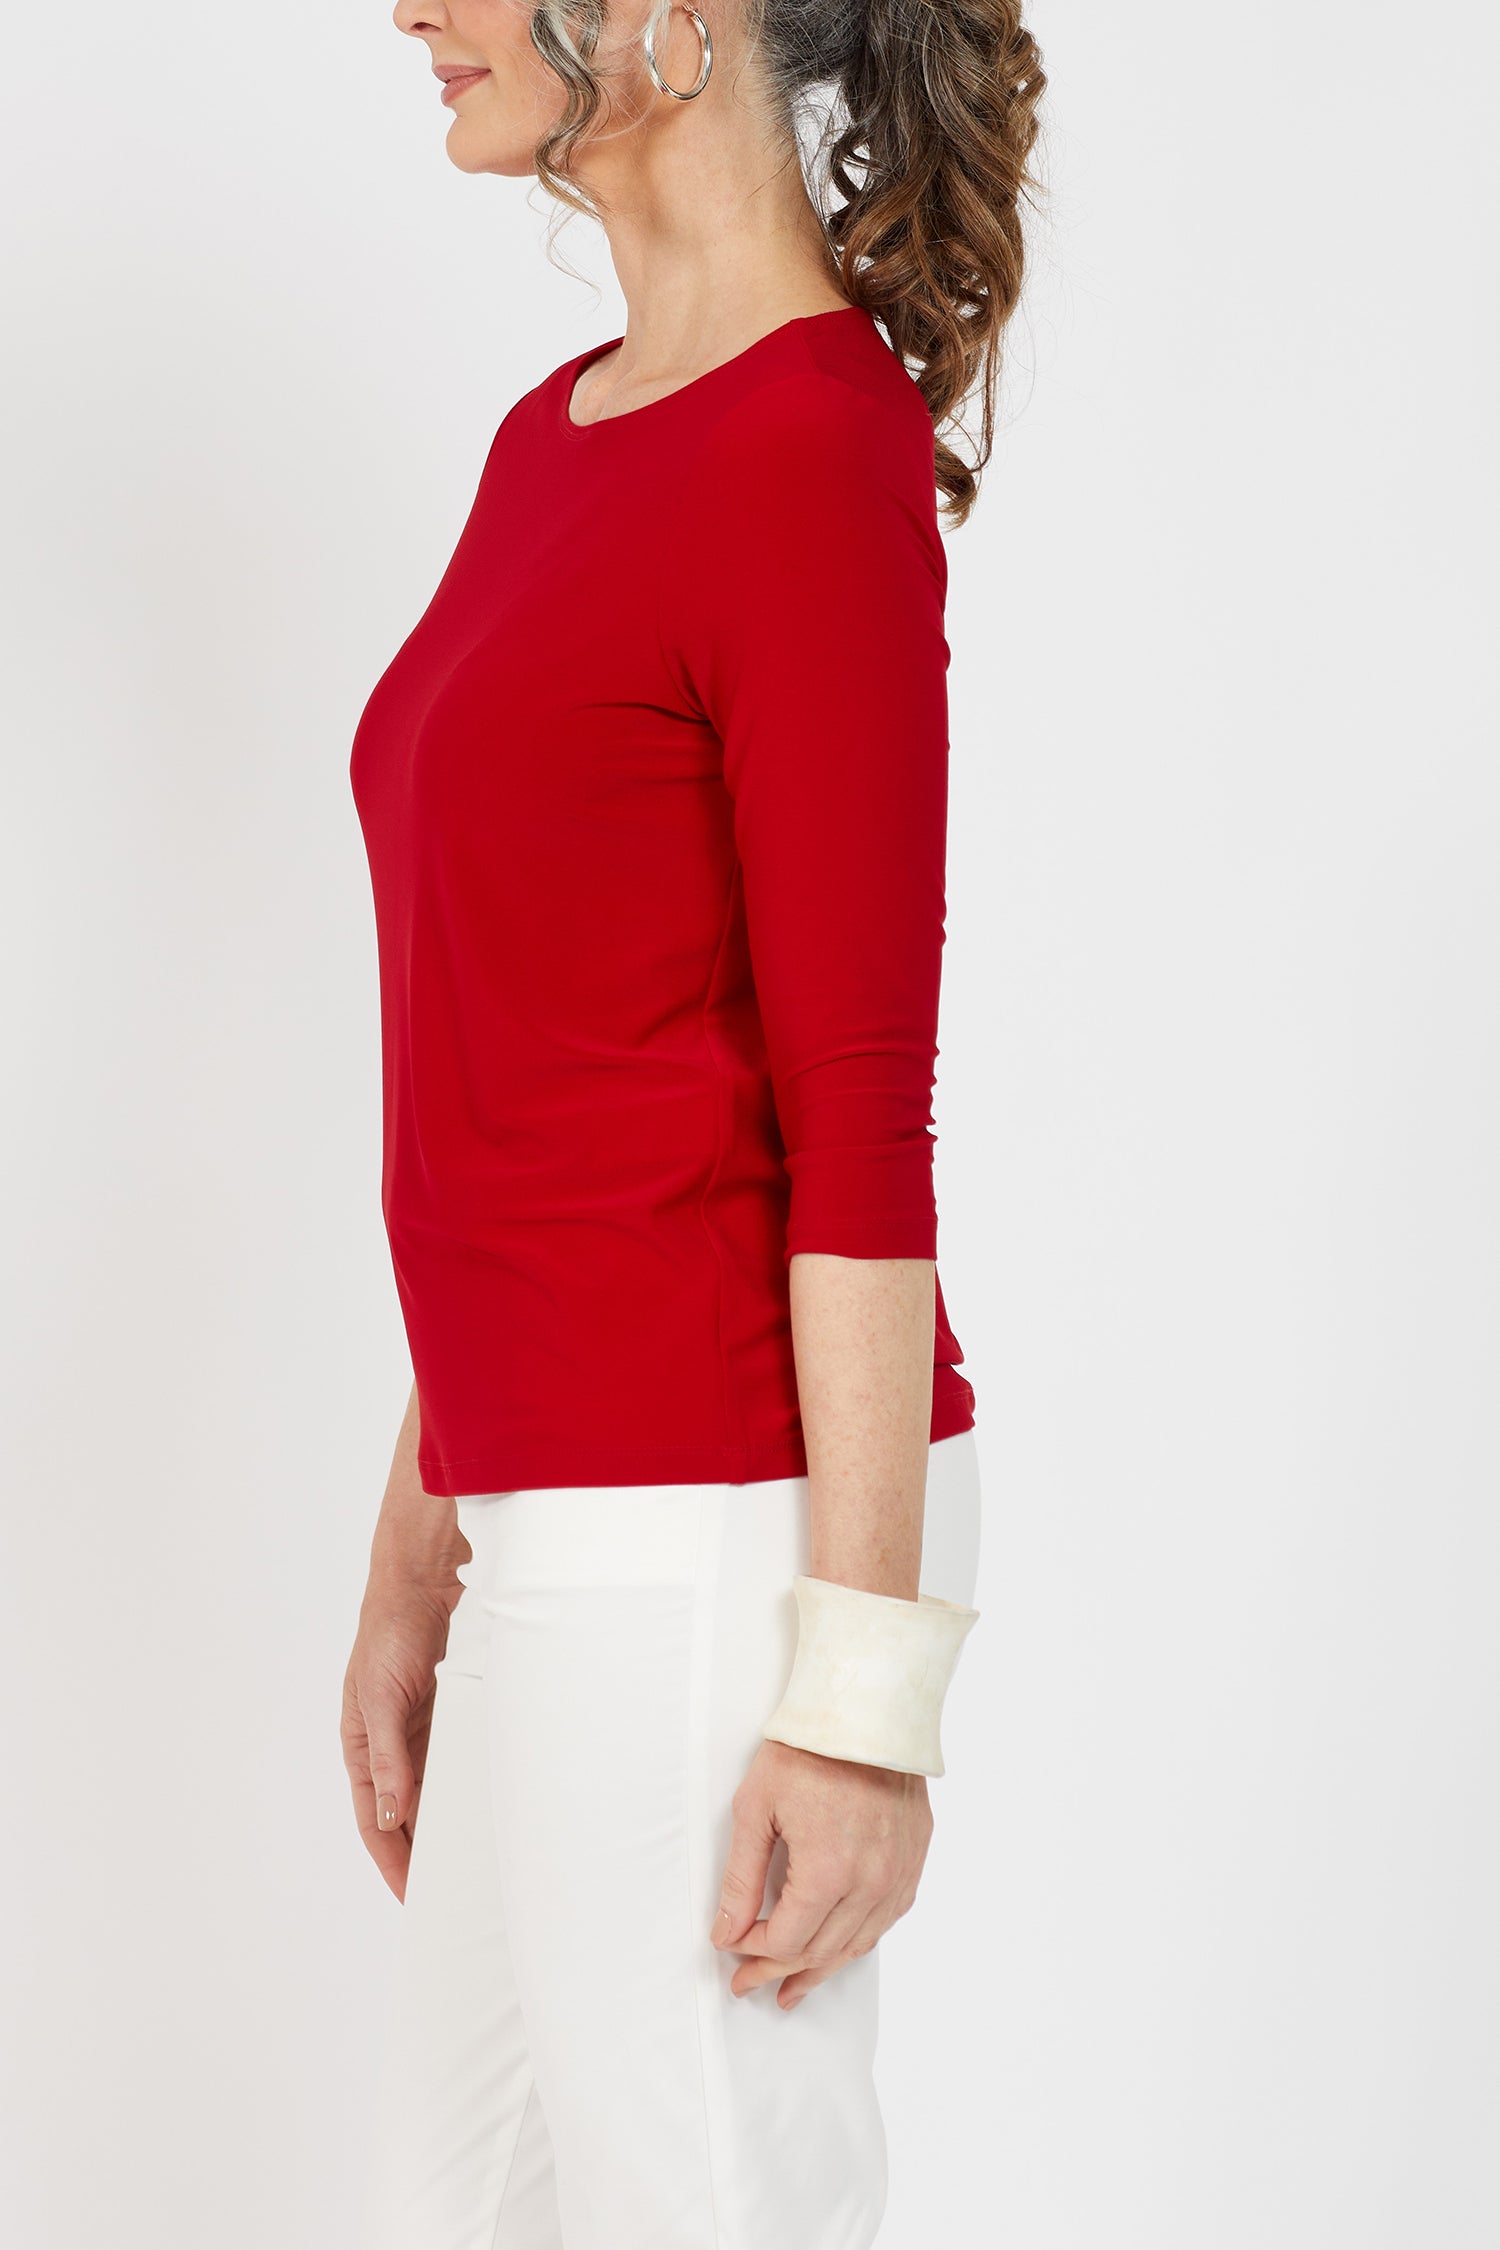 Voyager ¾ Boat Neck Top